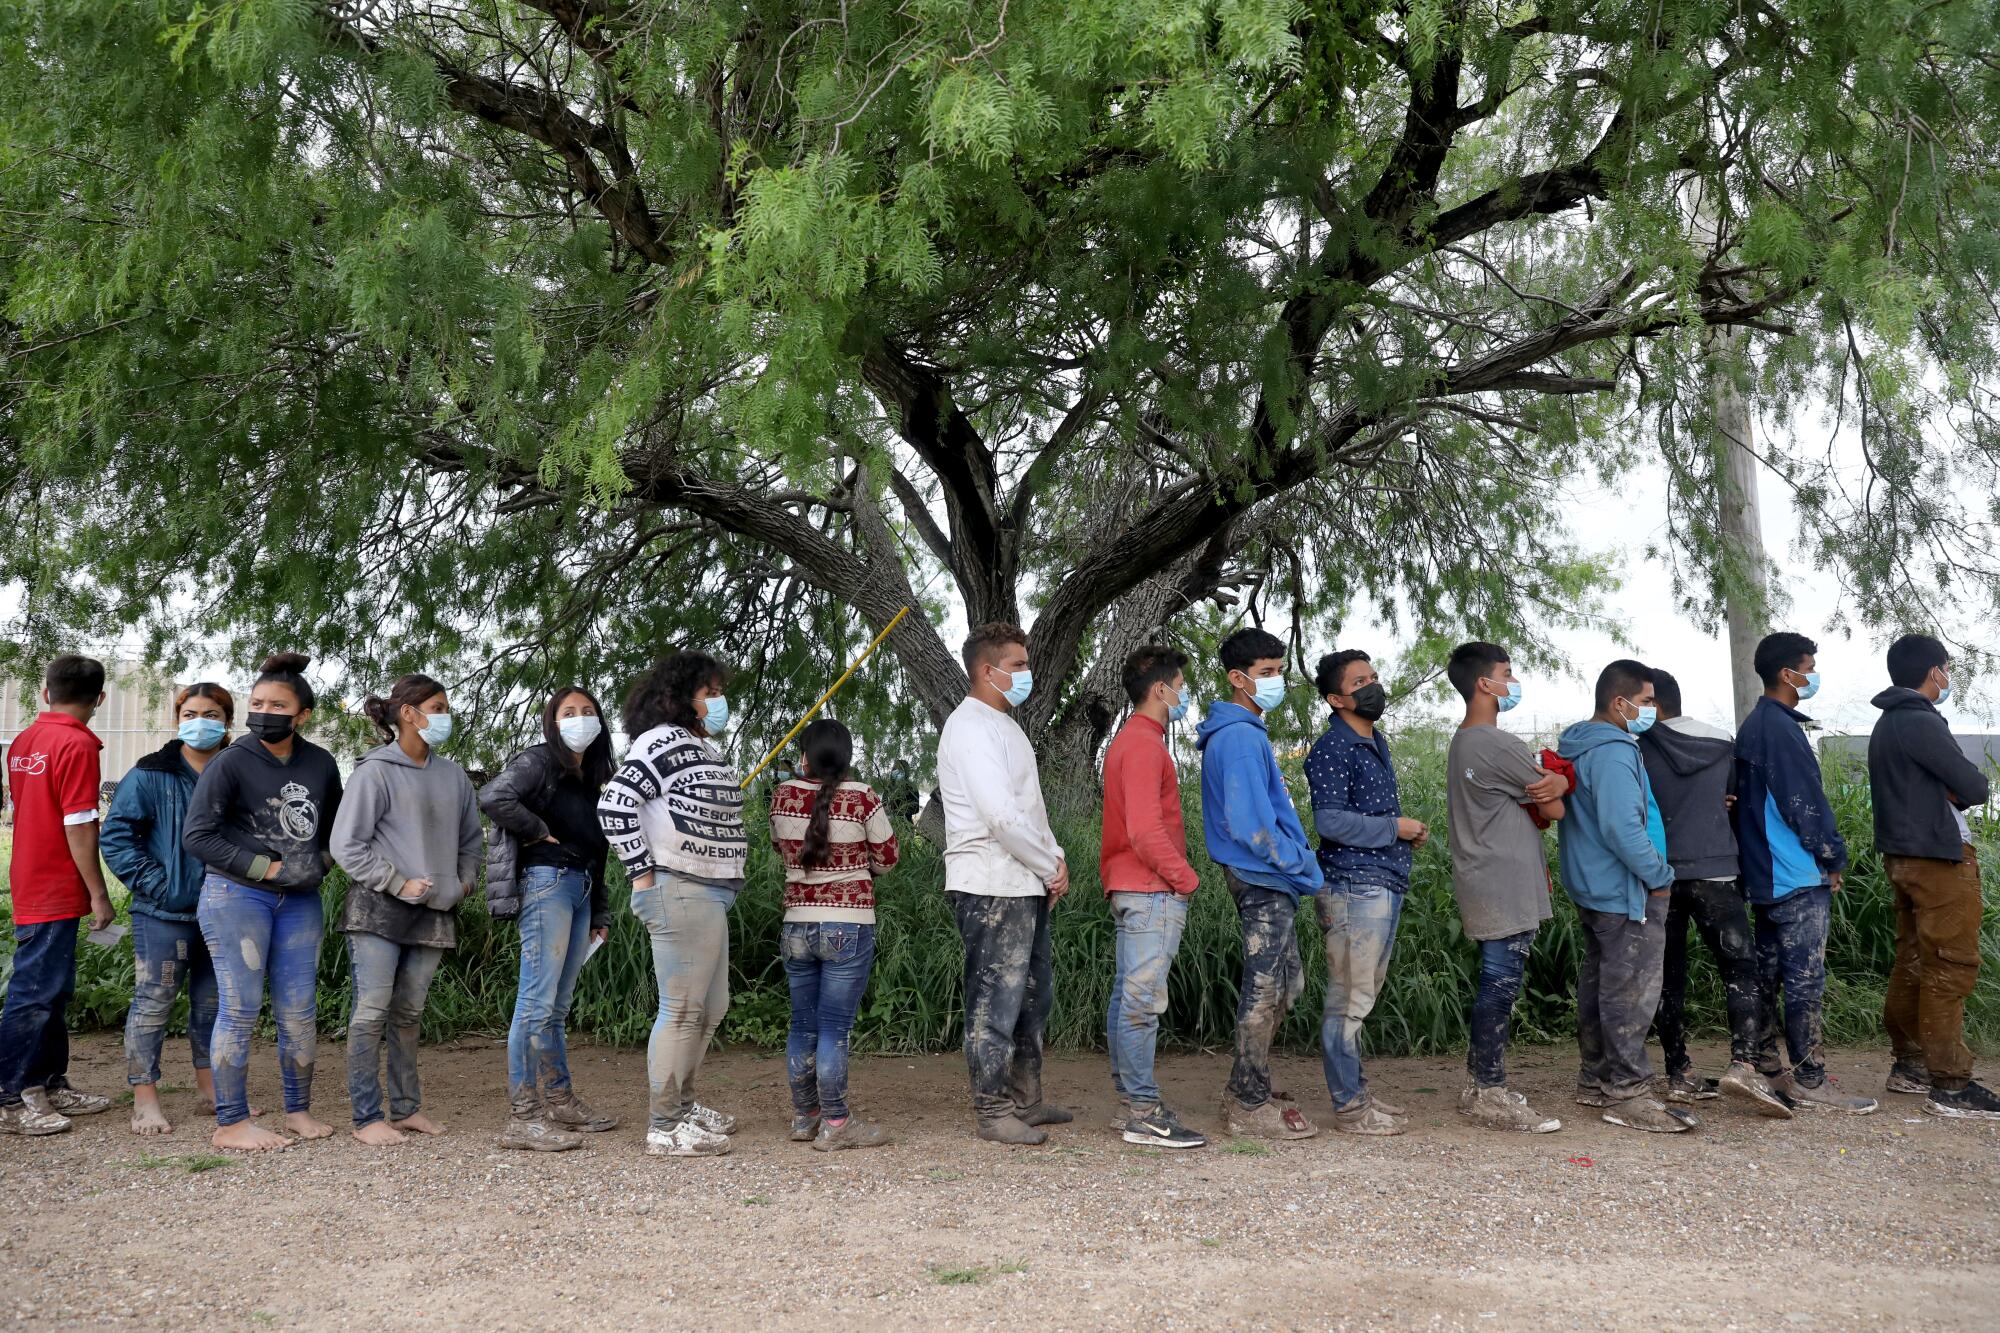 People line up along a dirt path in front of a tree. 